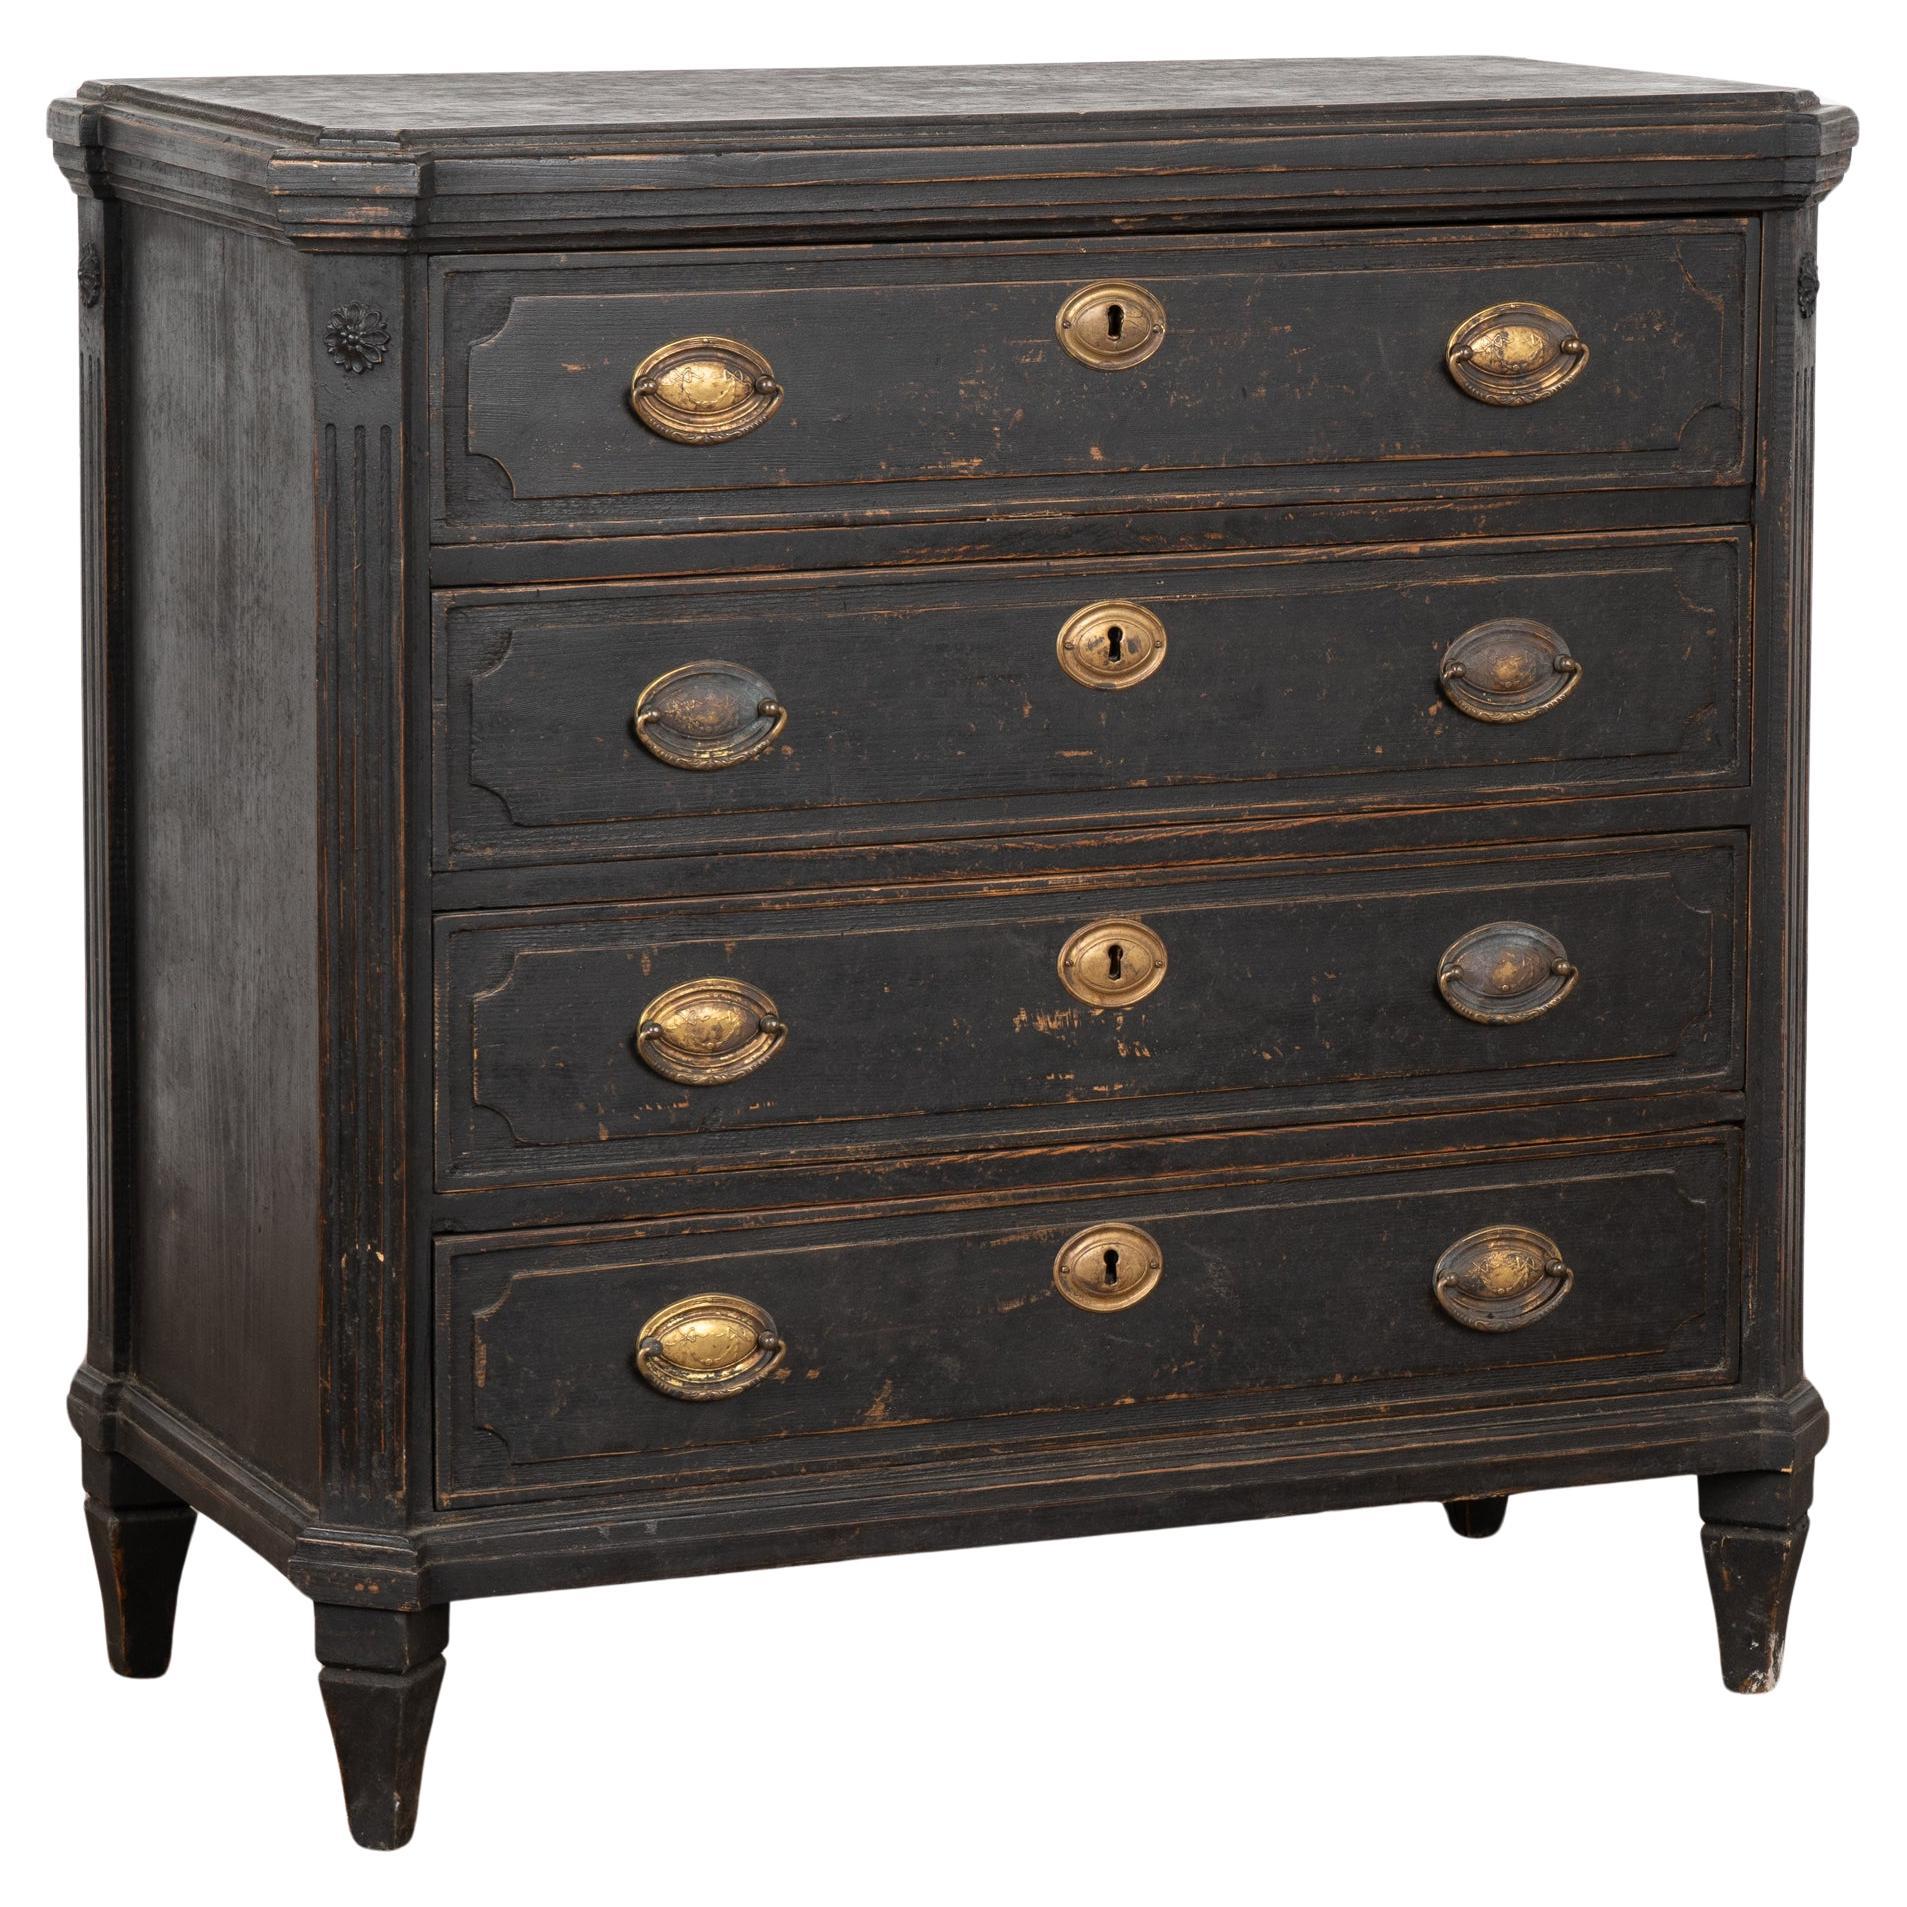 Black Painted Pine Chest of Four Drawers, Sweden circa 1840-60